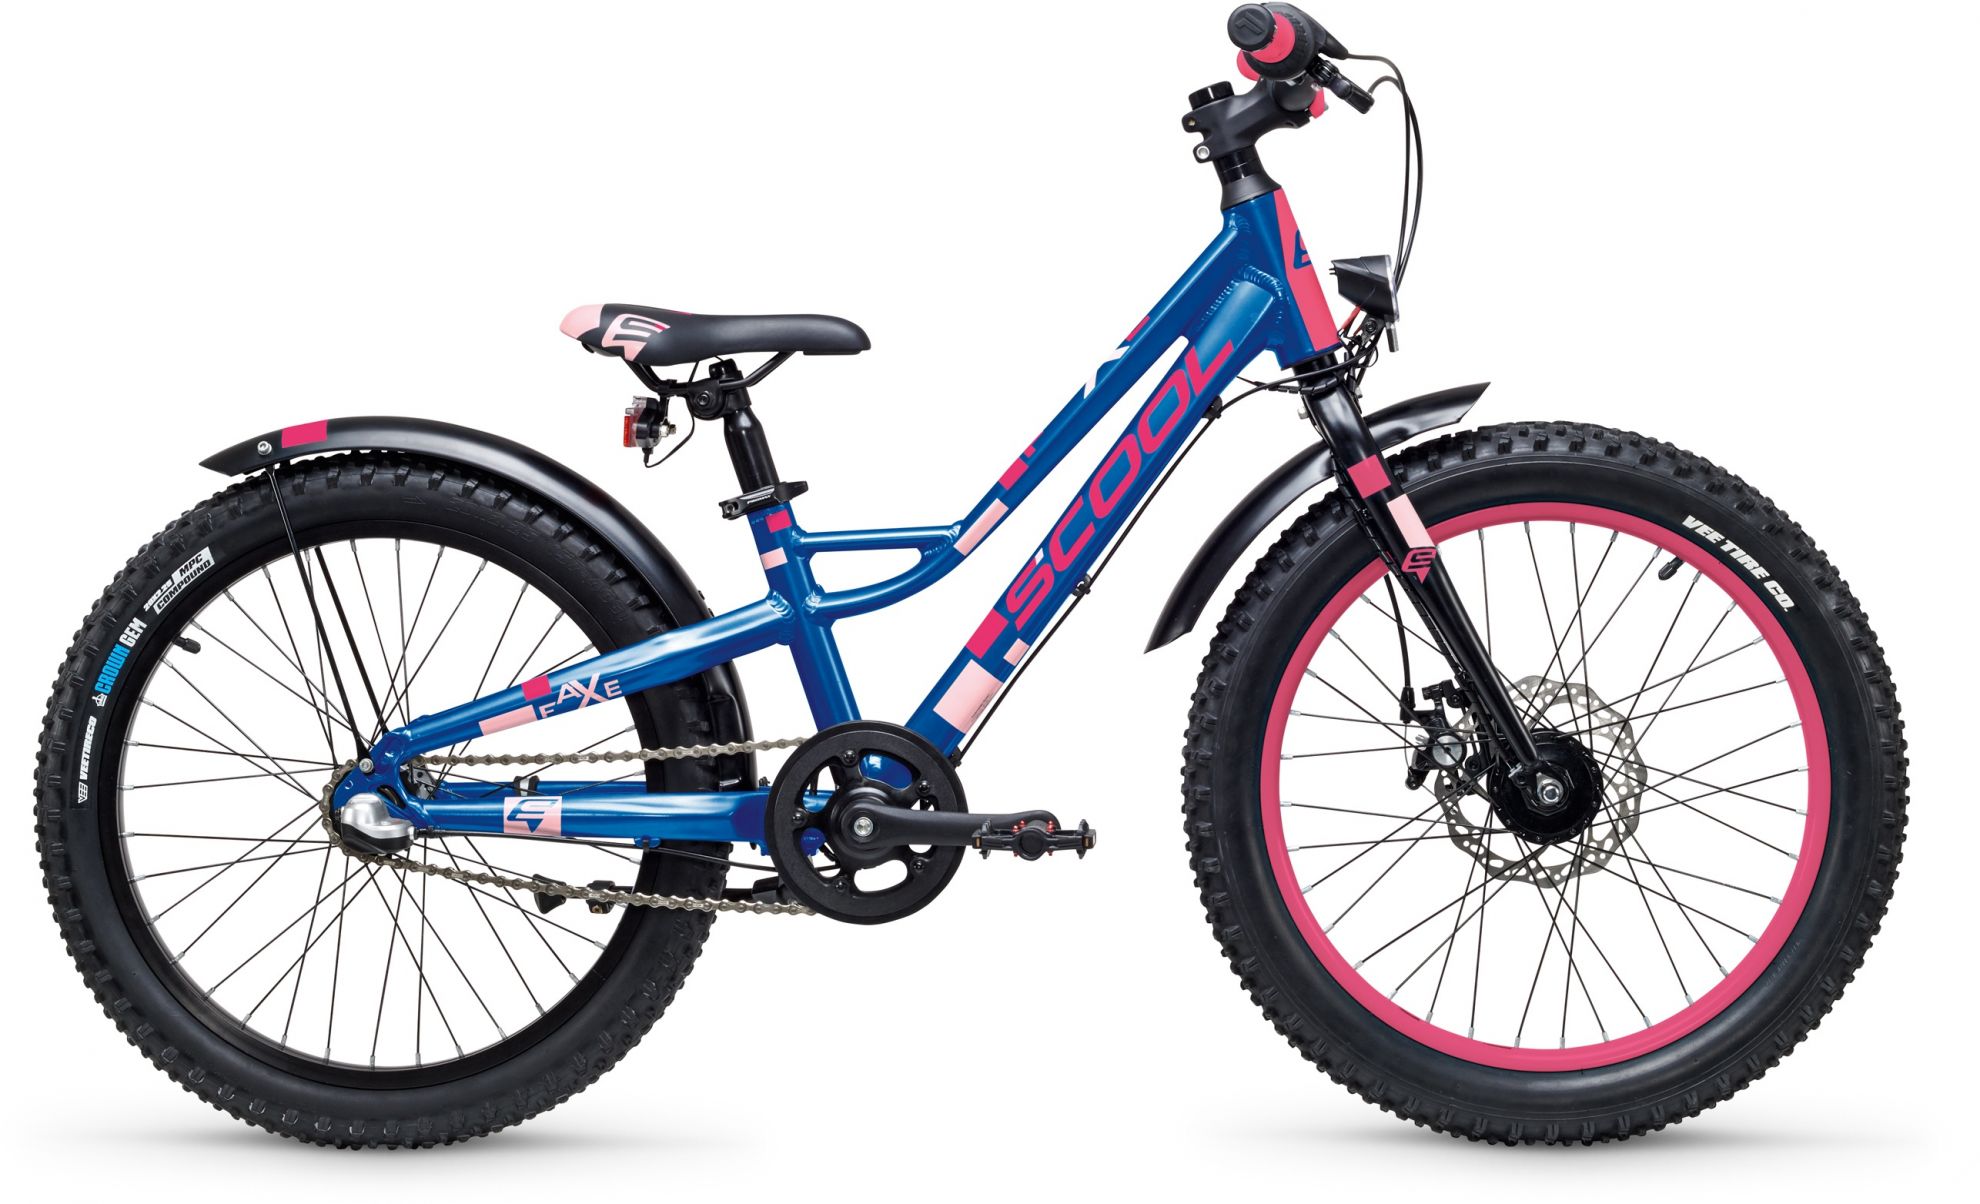 S'COOL | Kindervelo 20" | faxe 2 | Blau-pink